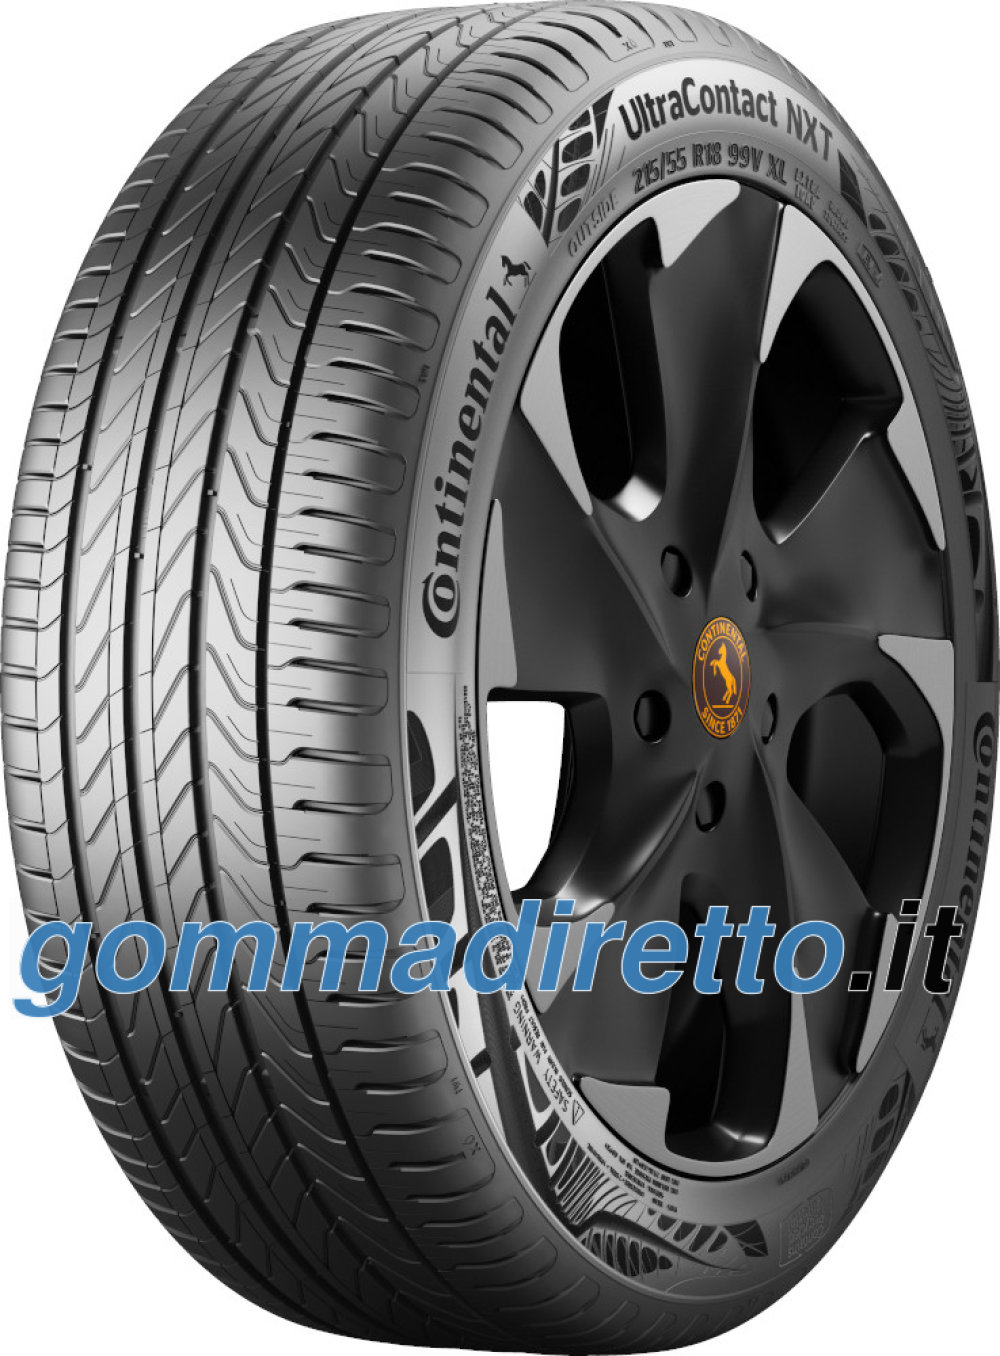 Image of Continental UltraContact NXT - ContiRe.Tex ( 205/55 R17 95V XL CRM, EVc )